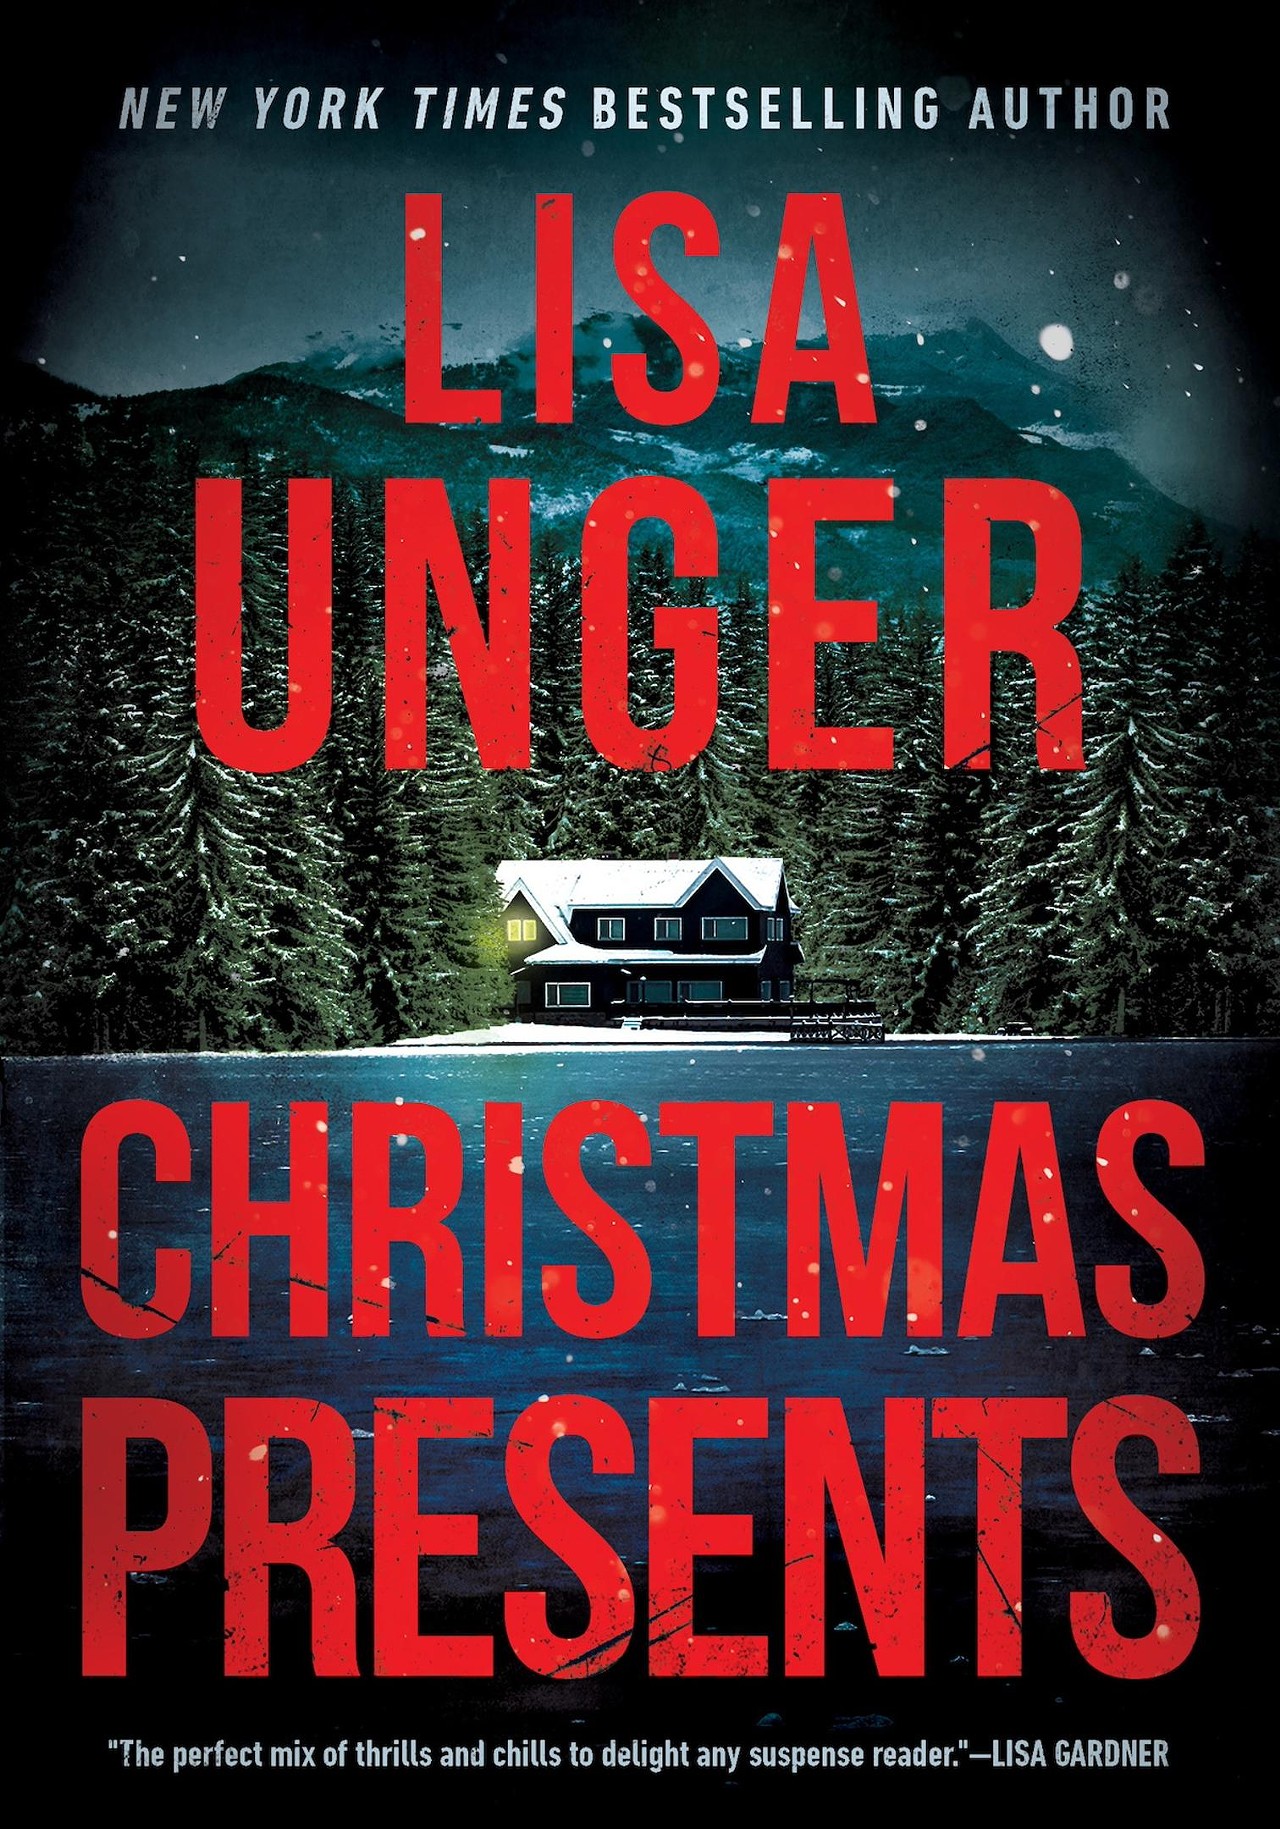 ‘Christmas Presents’ By Lisa Unger
A thrilling holiday crime novella sees a bookshop owner haunted by her past have those secrets and trauma brought back to life by the arrival of a relentless true crime podcaster. It’s a chilling small town tale of murder, cold cases and obsession over finding the truth and justice. (Mysterious Press)
Photo via Mysterious Press